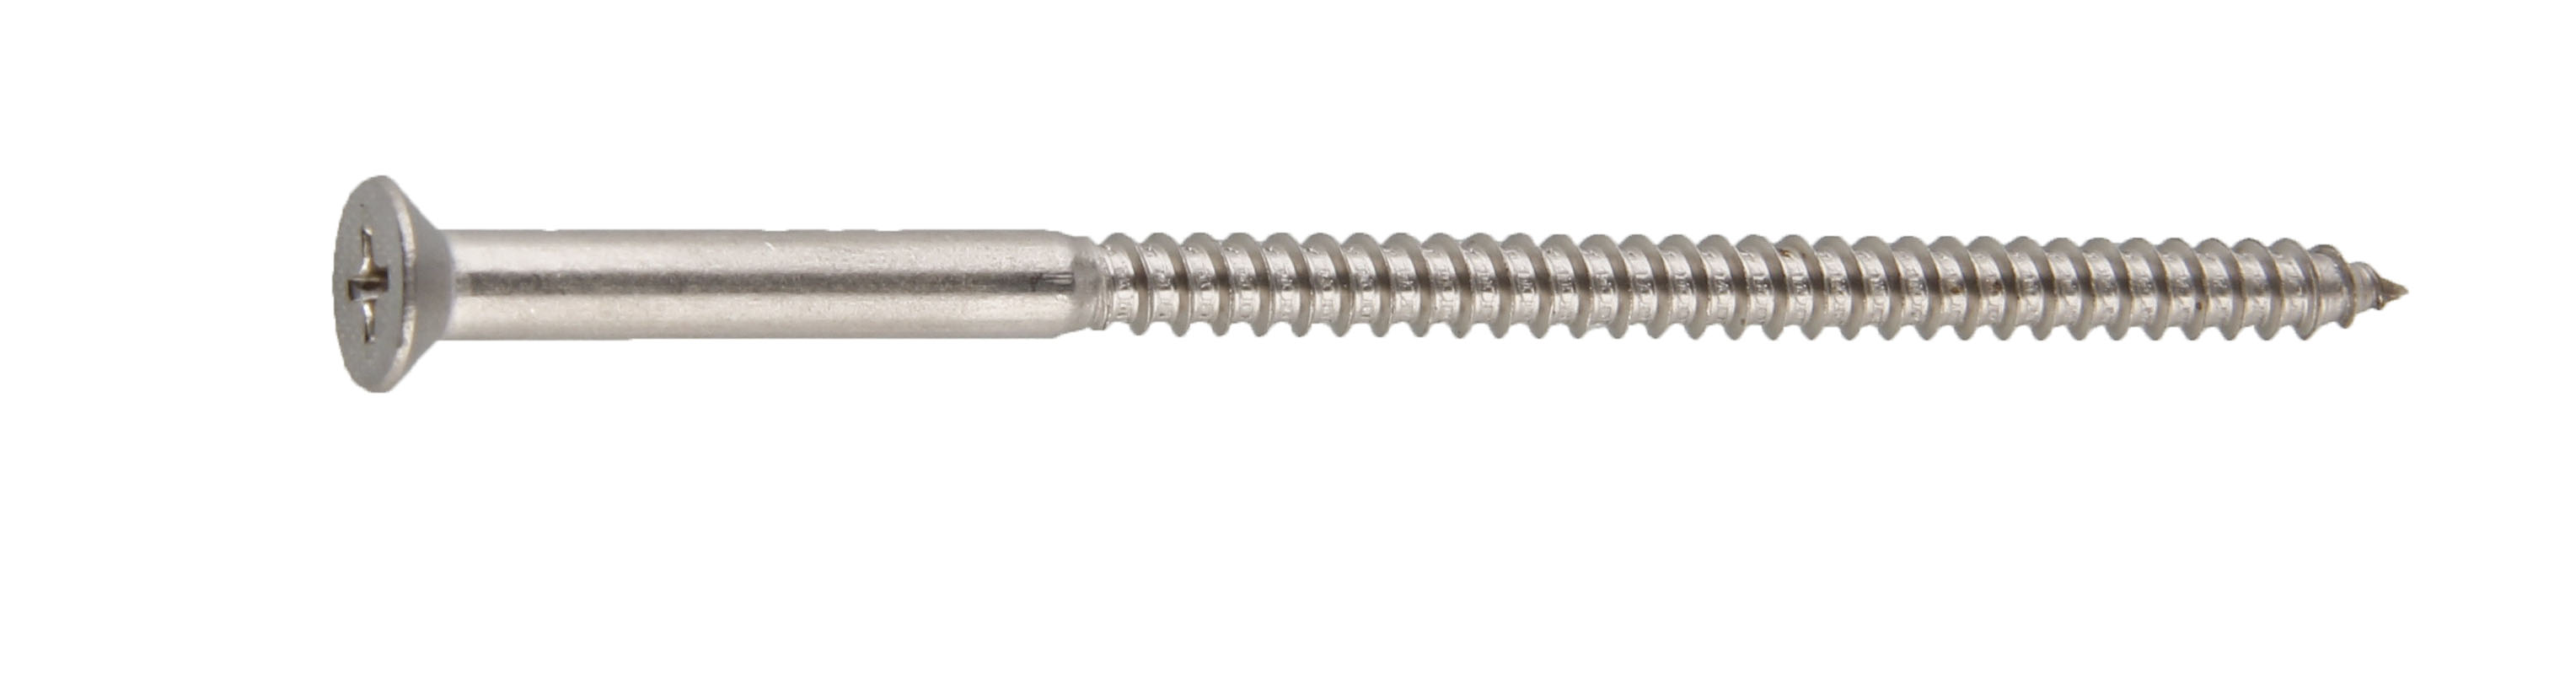 Self Tapping Screw,Phillips Countersunk Flat Head with Half Thread